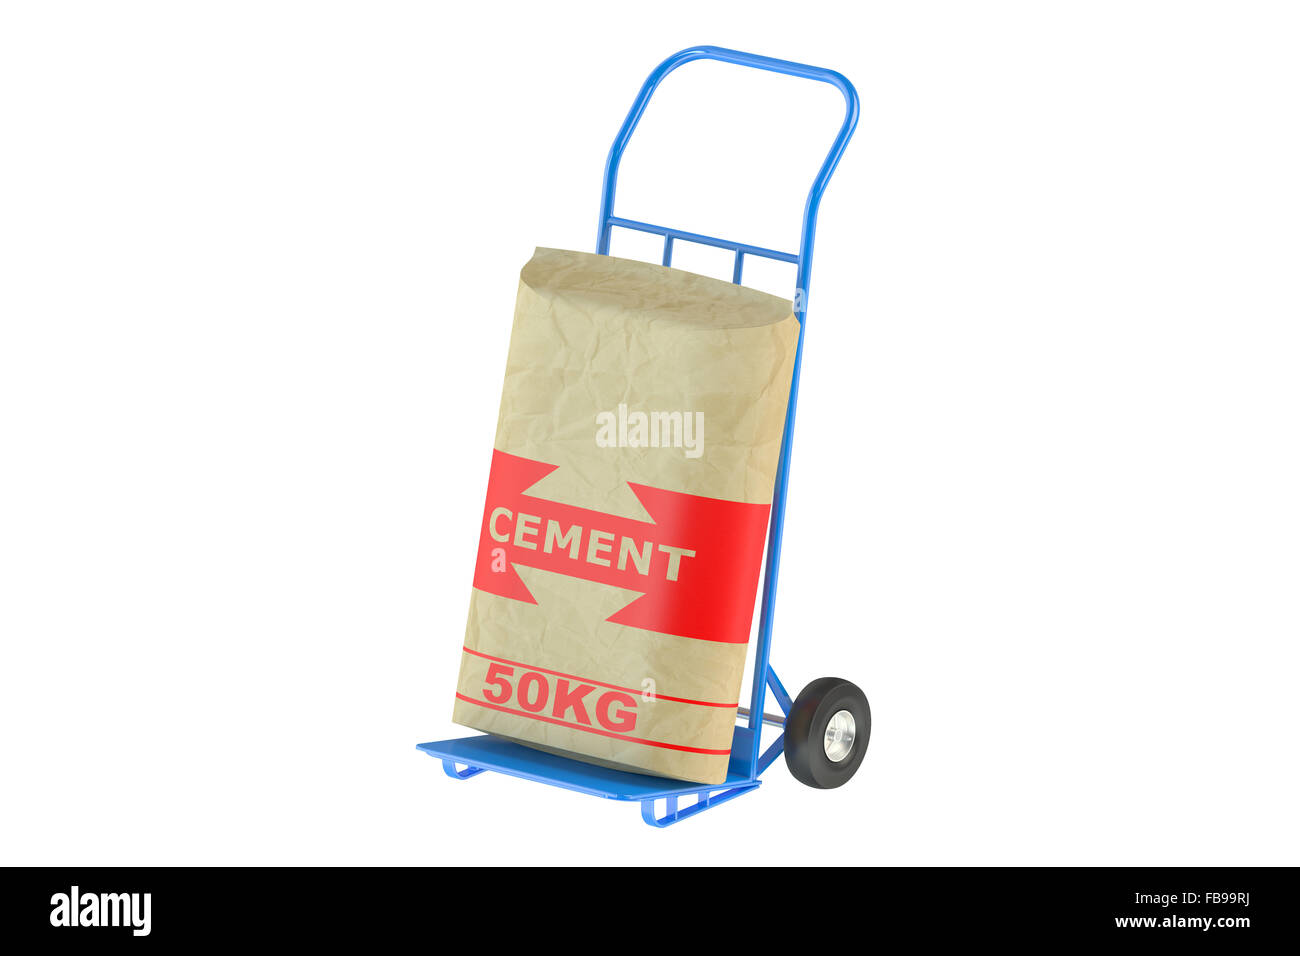 Cement bag on the hand truck isolated on white background Stock Photo